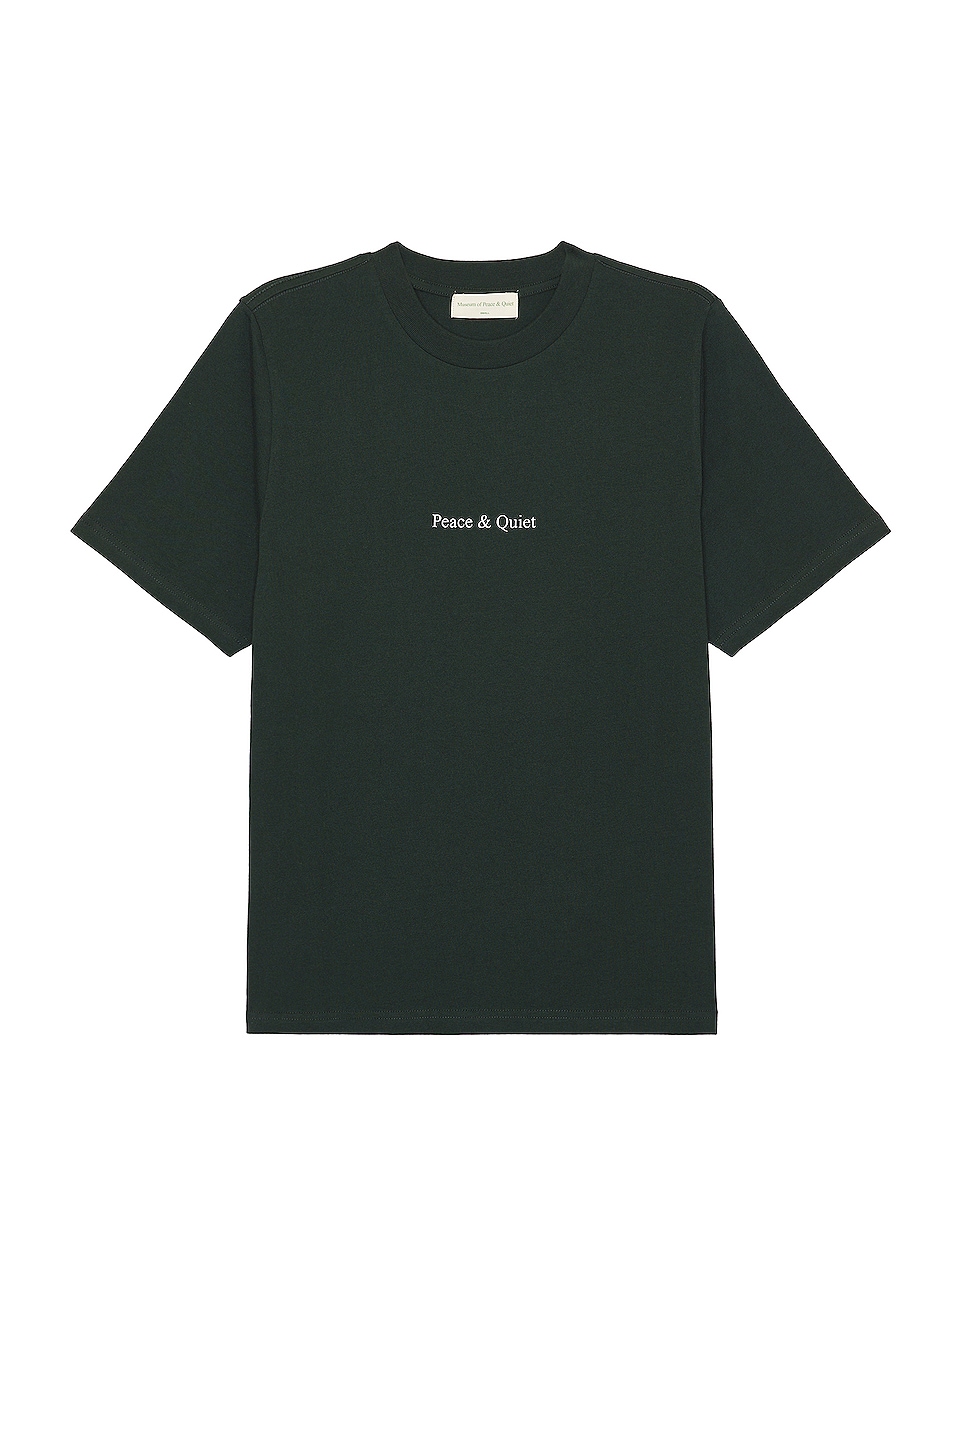 Museum of Peace and Quiet Classic T-shirt in Pine | REVOLVE